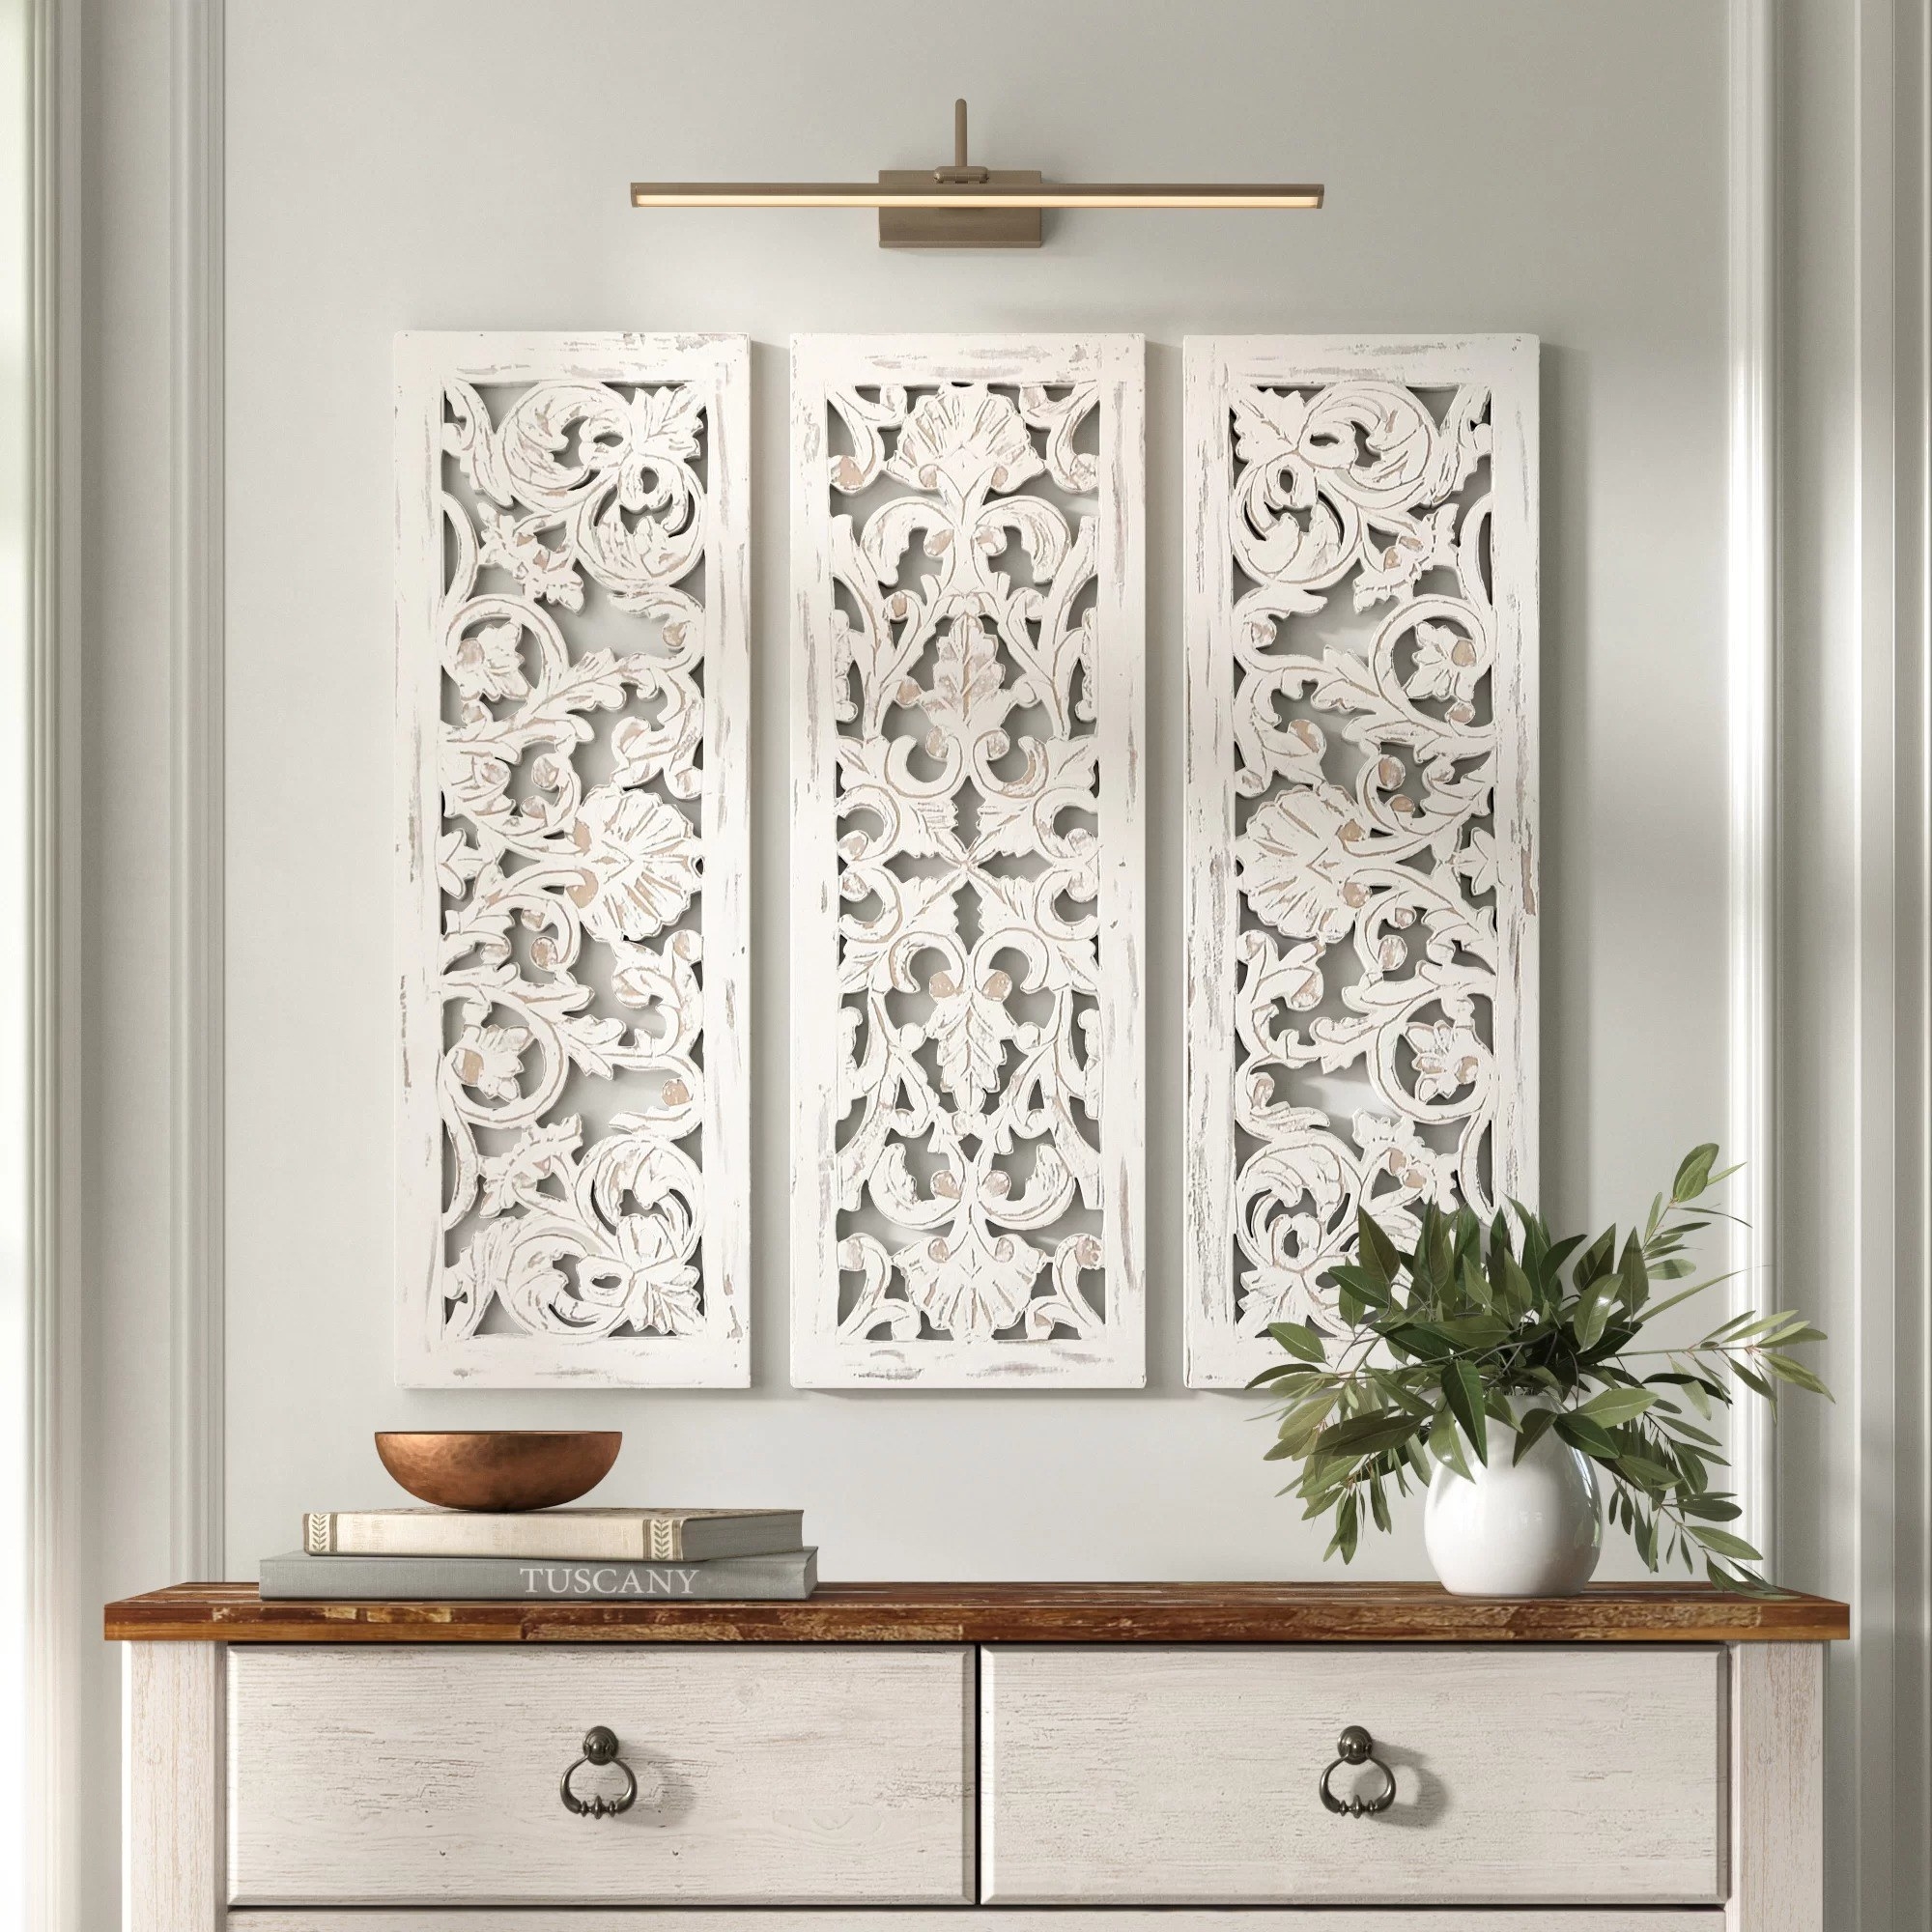 The three-piece wall decor set with an intricate floral pattern hanging on a wall